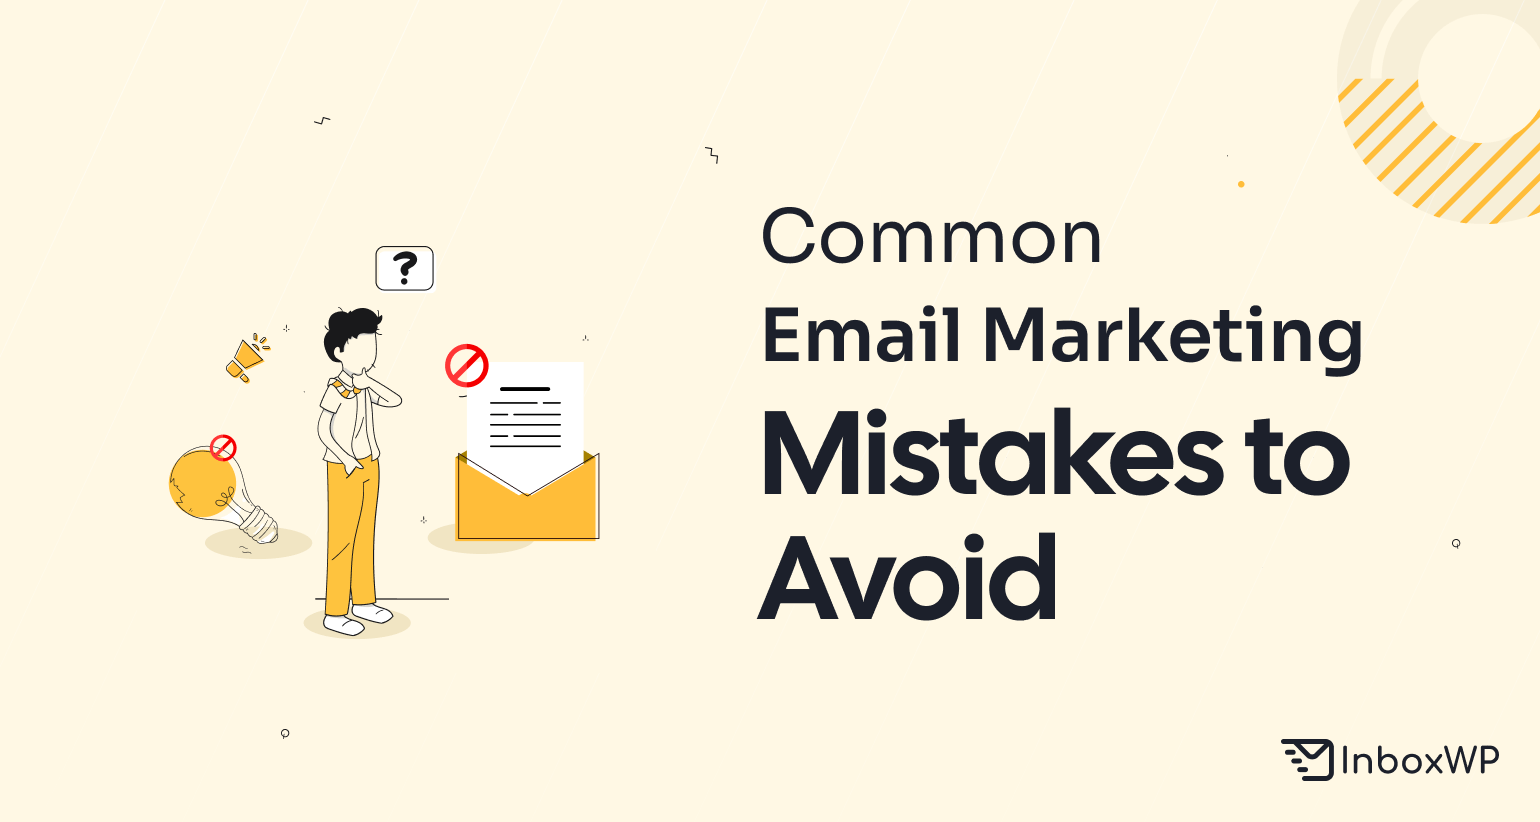 Common Email Marketing Mistakes to Avoid